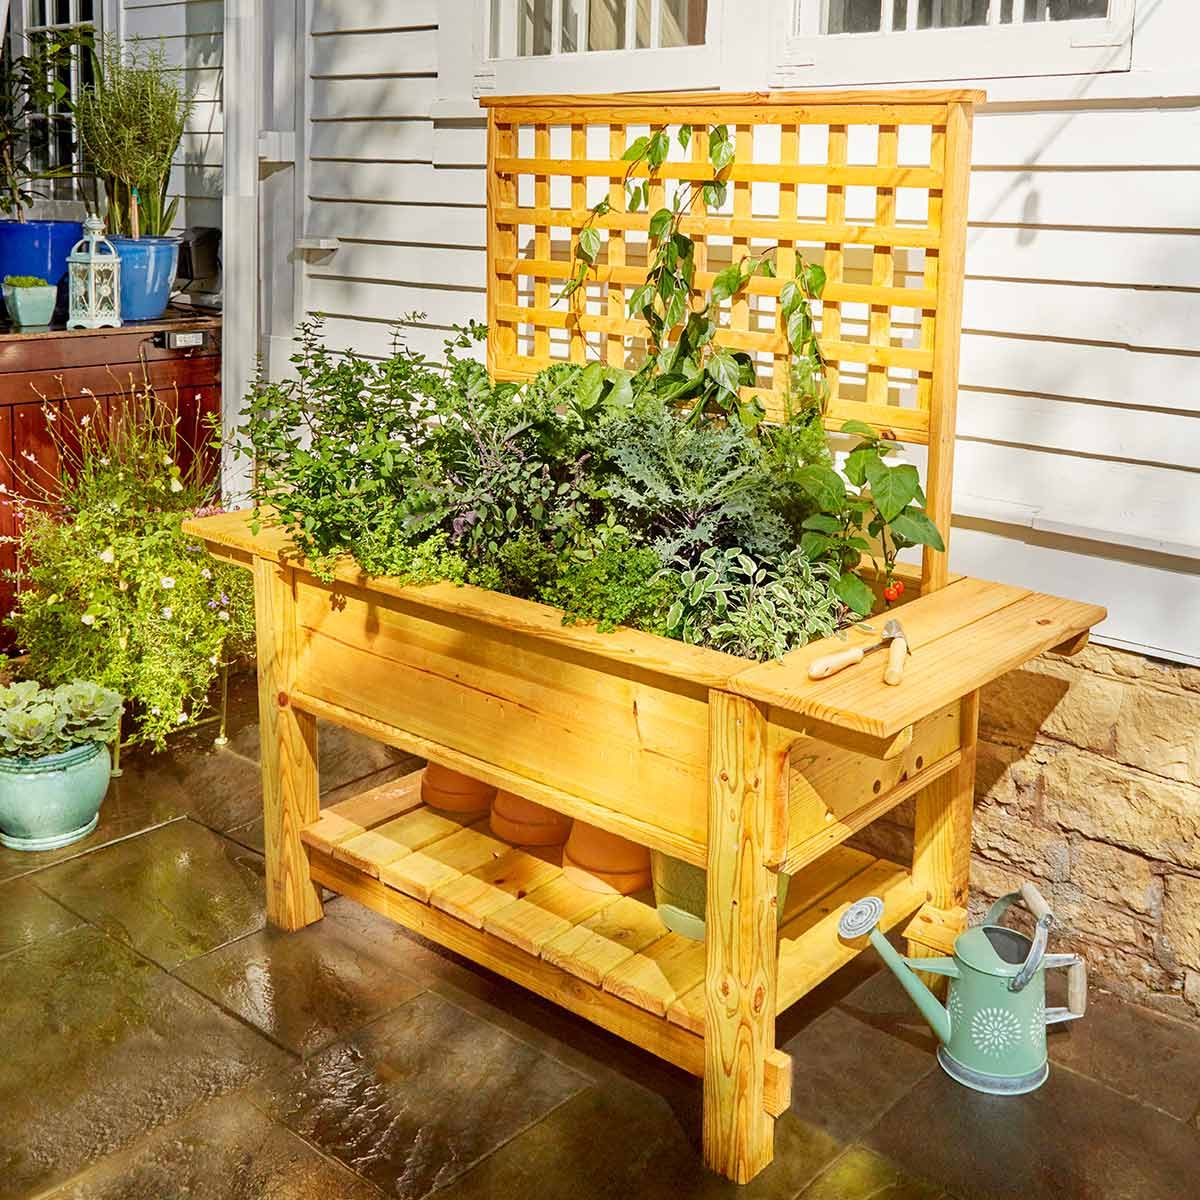 Outdoor woodworking projects for beginners